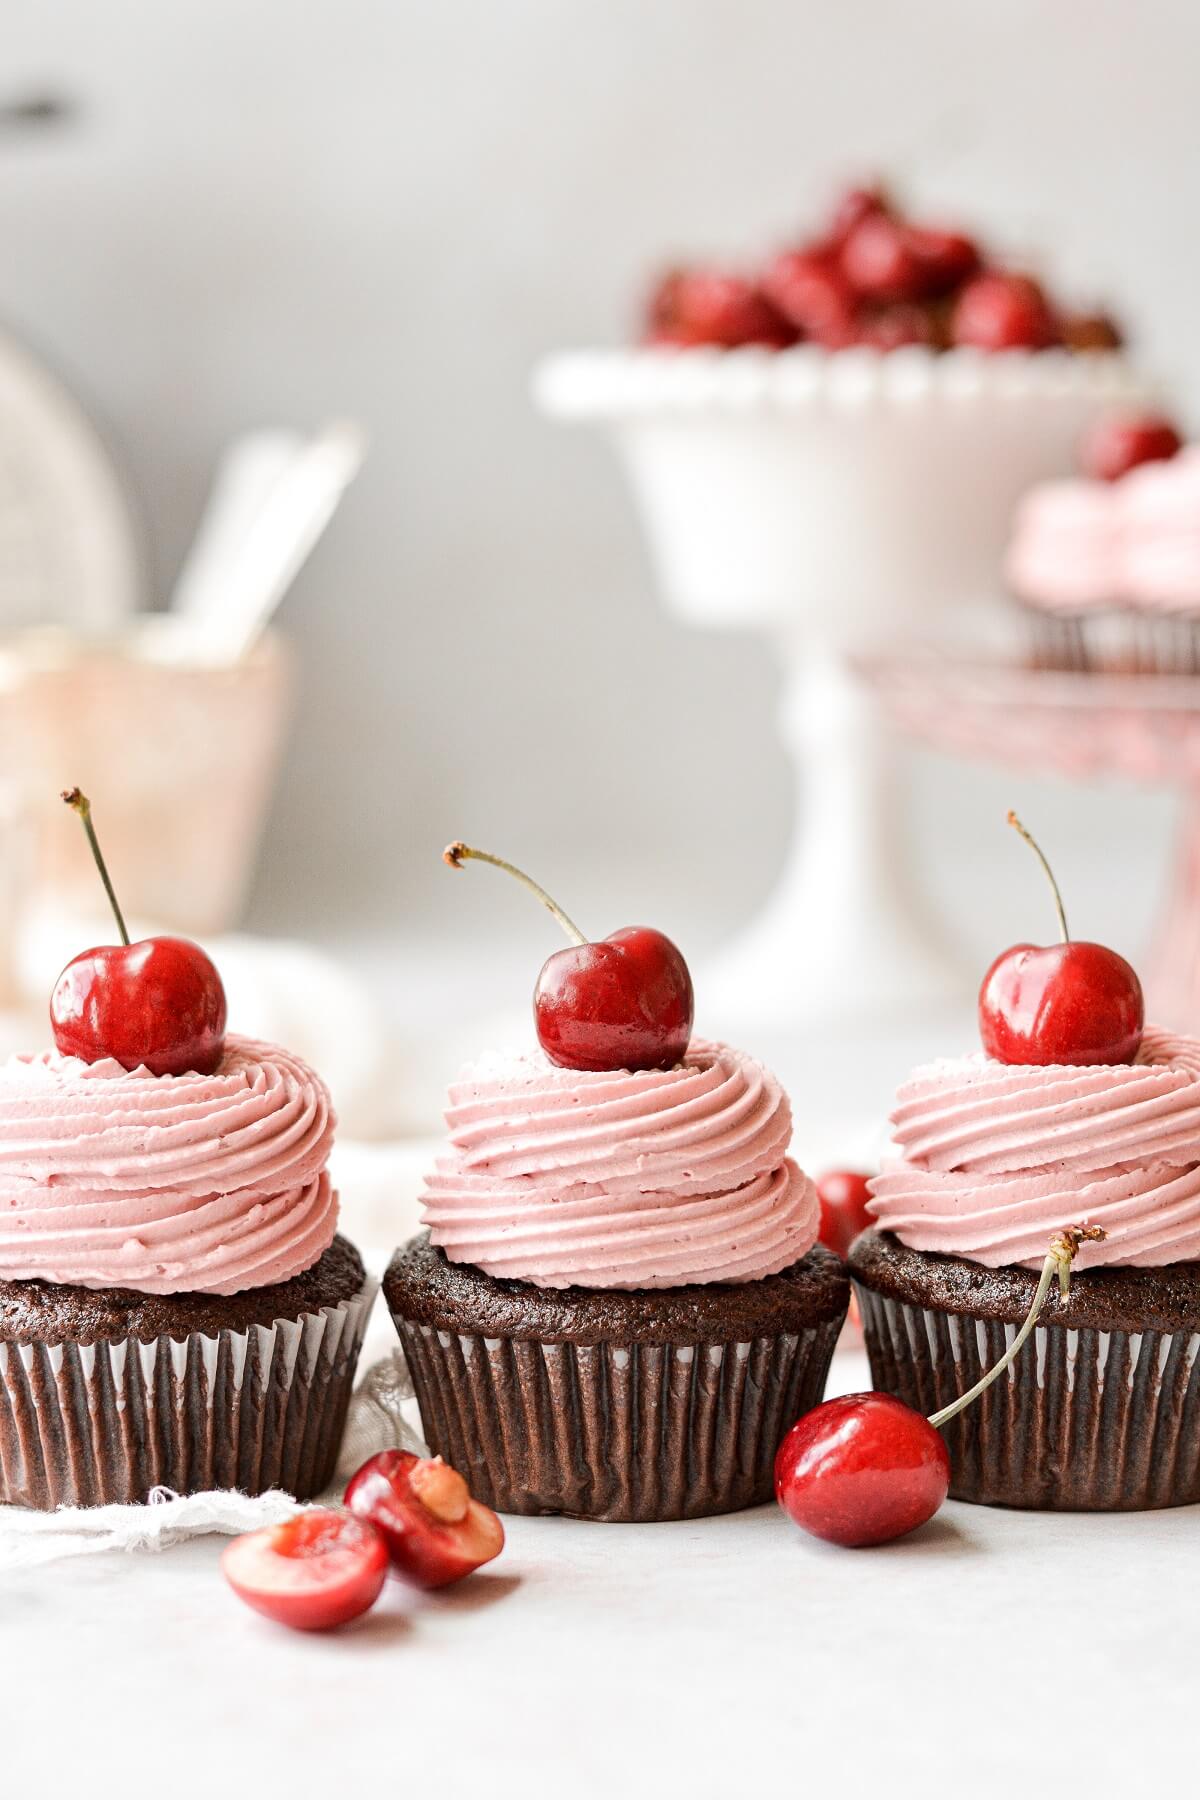 Chocolate cherry cupcakes topped with fresh cherries.